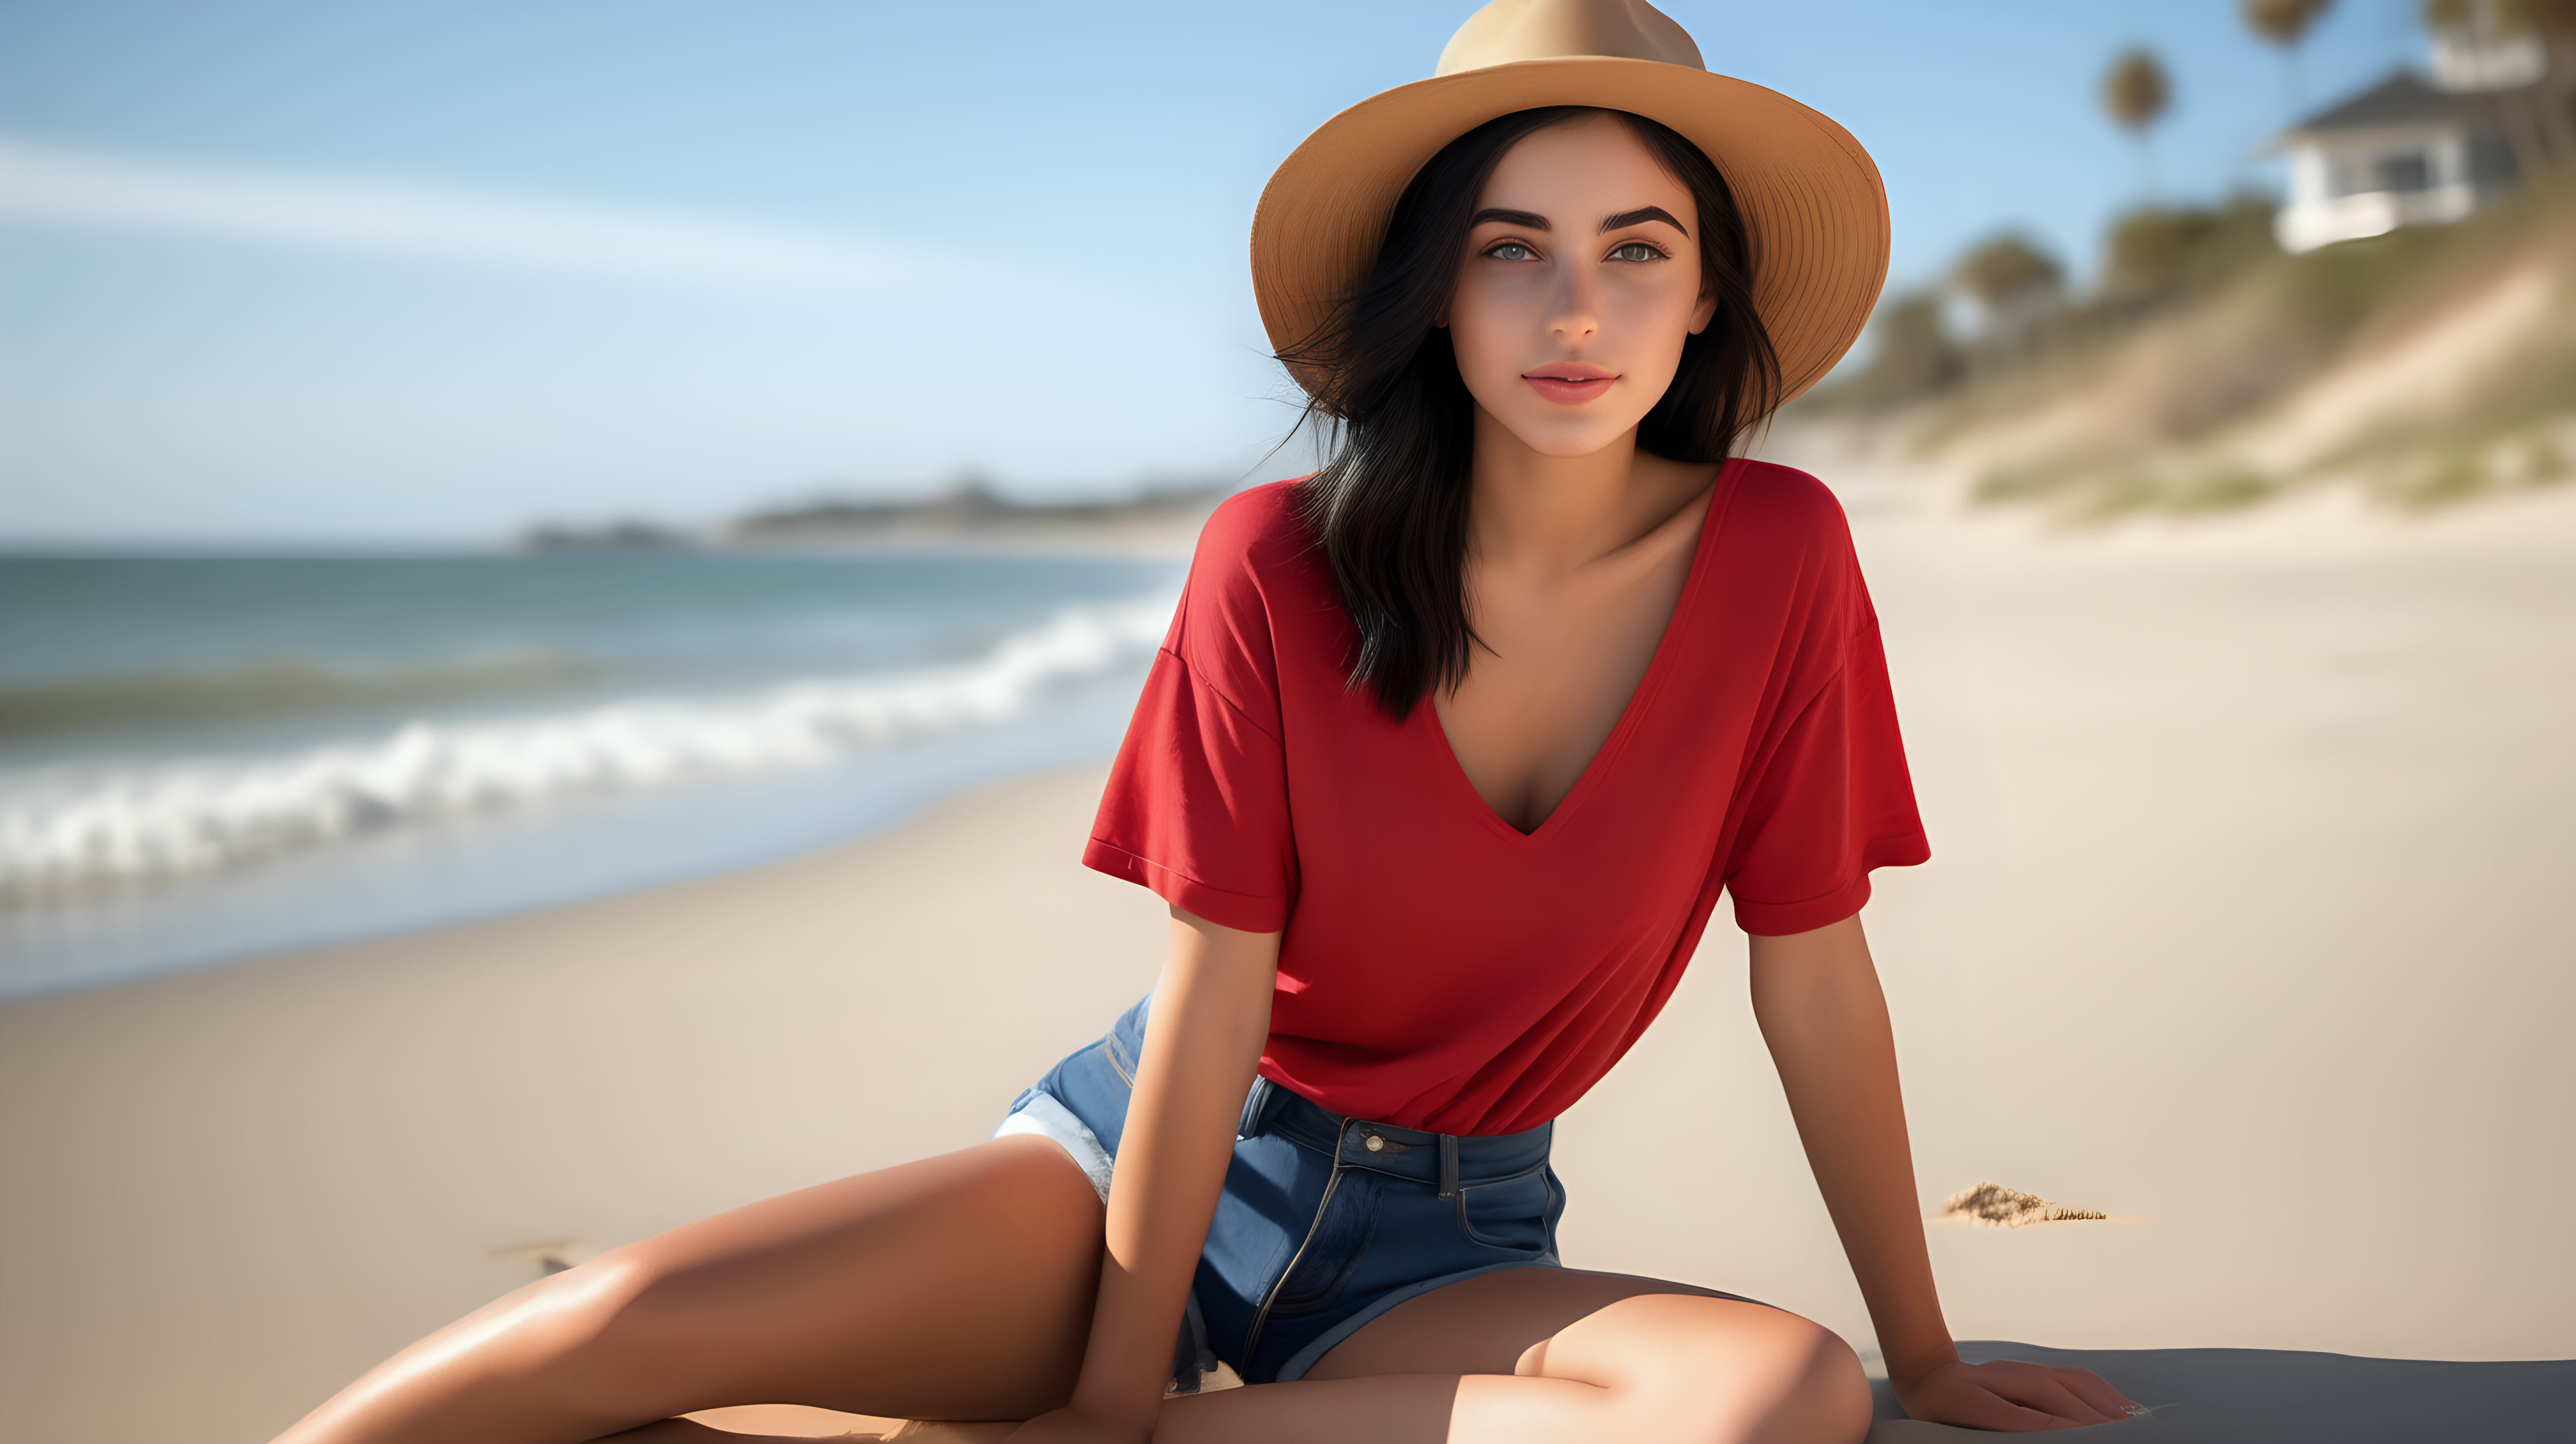 A photo of a beautiful  25 yo woman sitting on a sandy beach, wearing a hat and a red shirt. She is posing for the camera, sexy, and her outfit includes a pair of blue shorts. The beach setting and her attire create a relaxed and summery atmosphere. This photography is the best representation of female beauty, shiny black hair, hazel eyes, big tits. Extremely realistic textures and warm colors give the final touch. Sharp focus and realistic shadows add to the scene